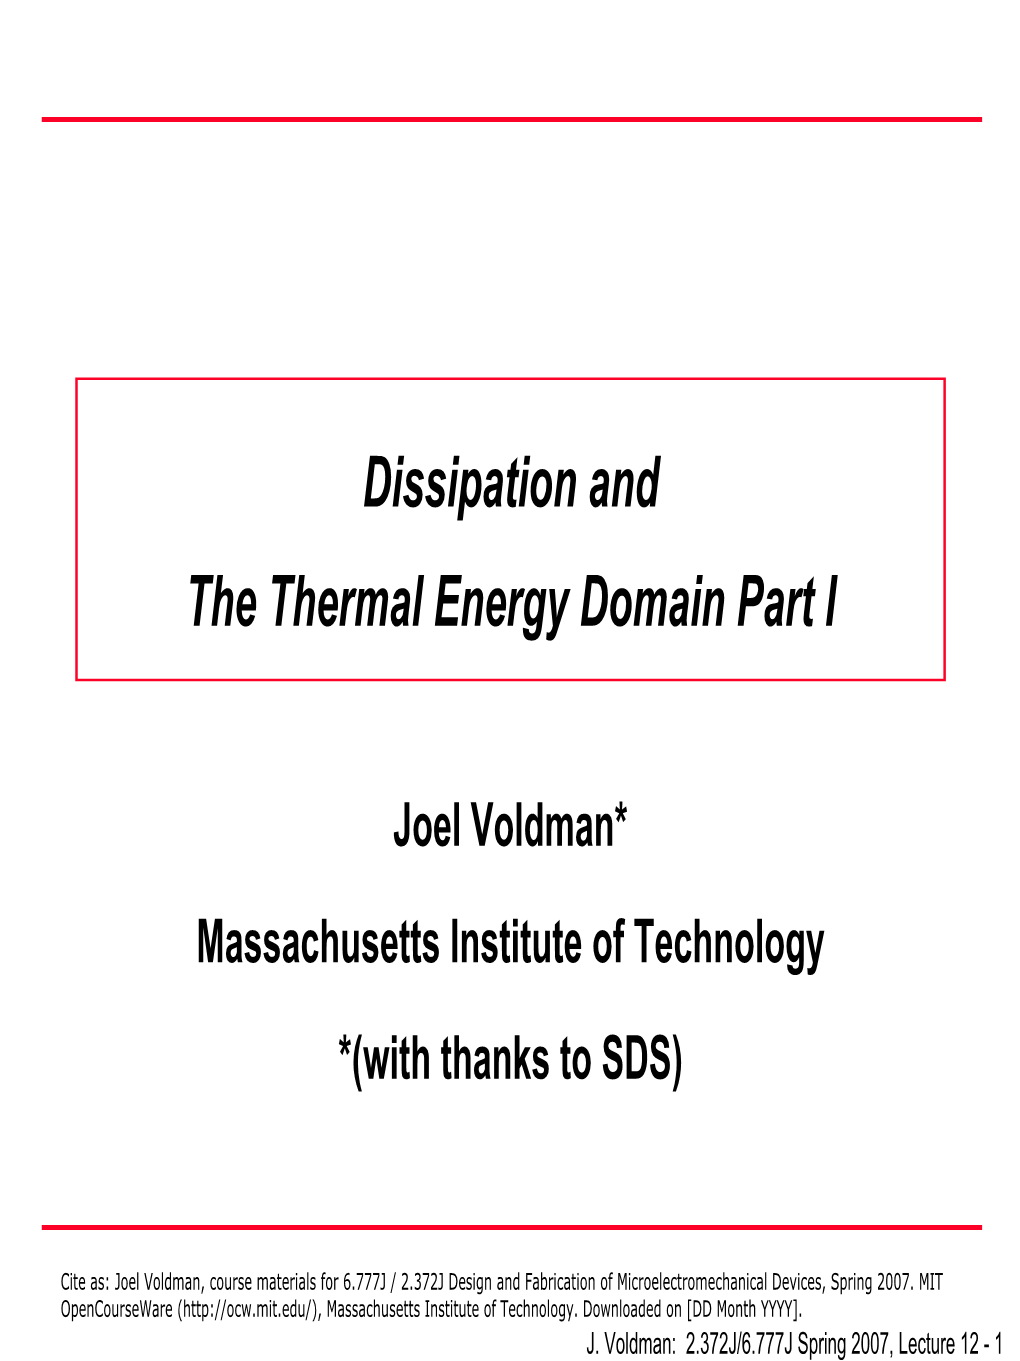 Dissipation and the Thermal Energy Domain Part I